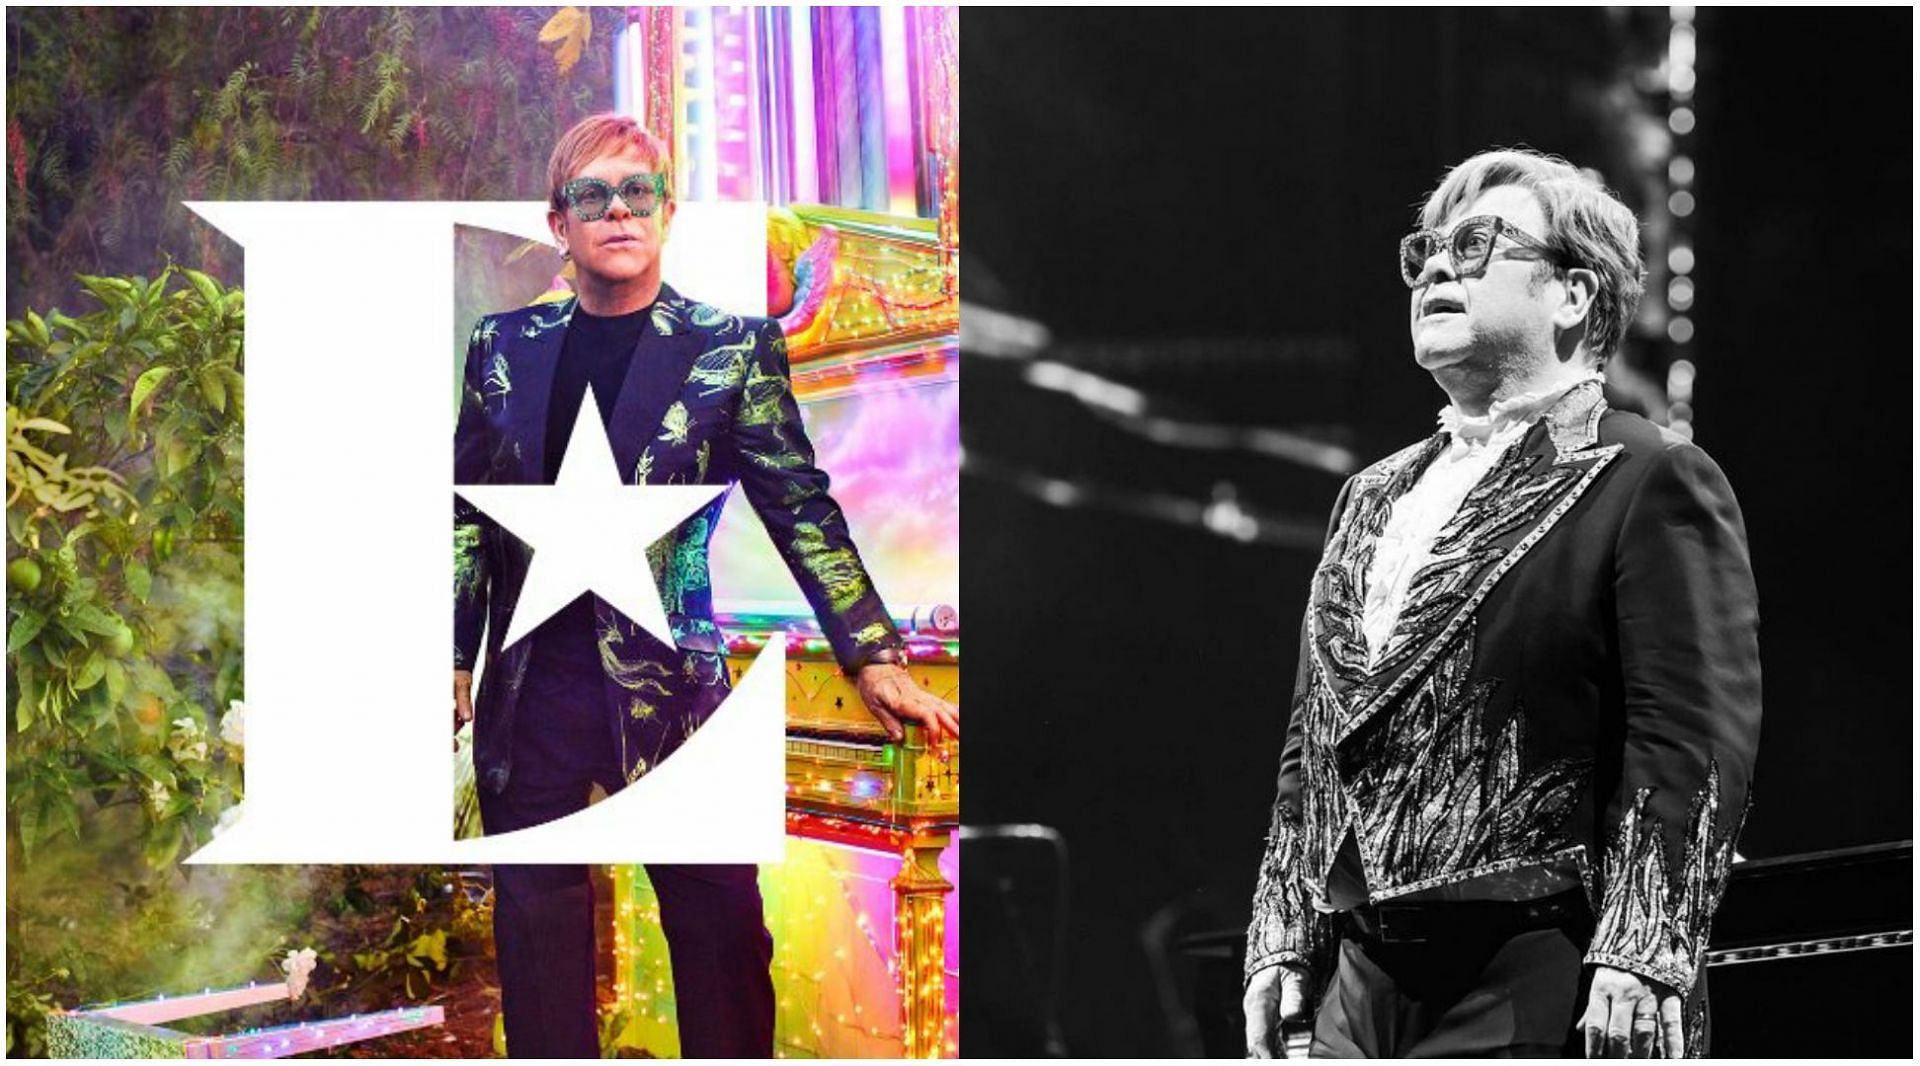 Elton John Says Farewell with Roblox – Writer of Pop Culture